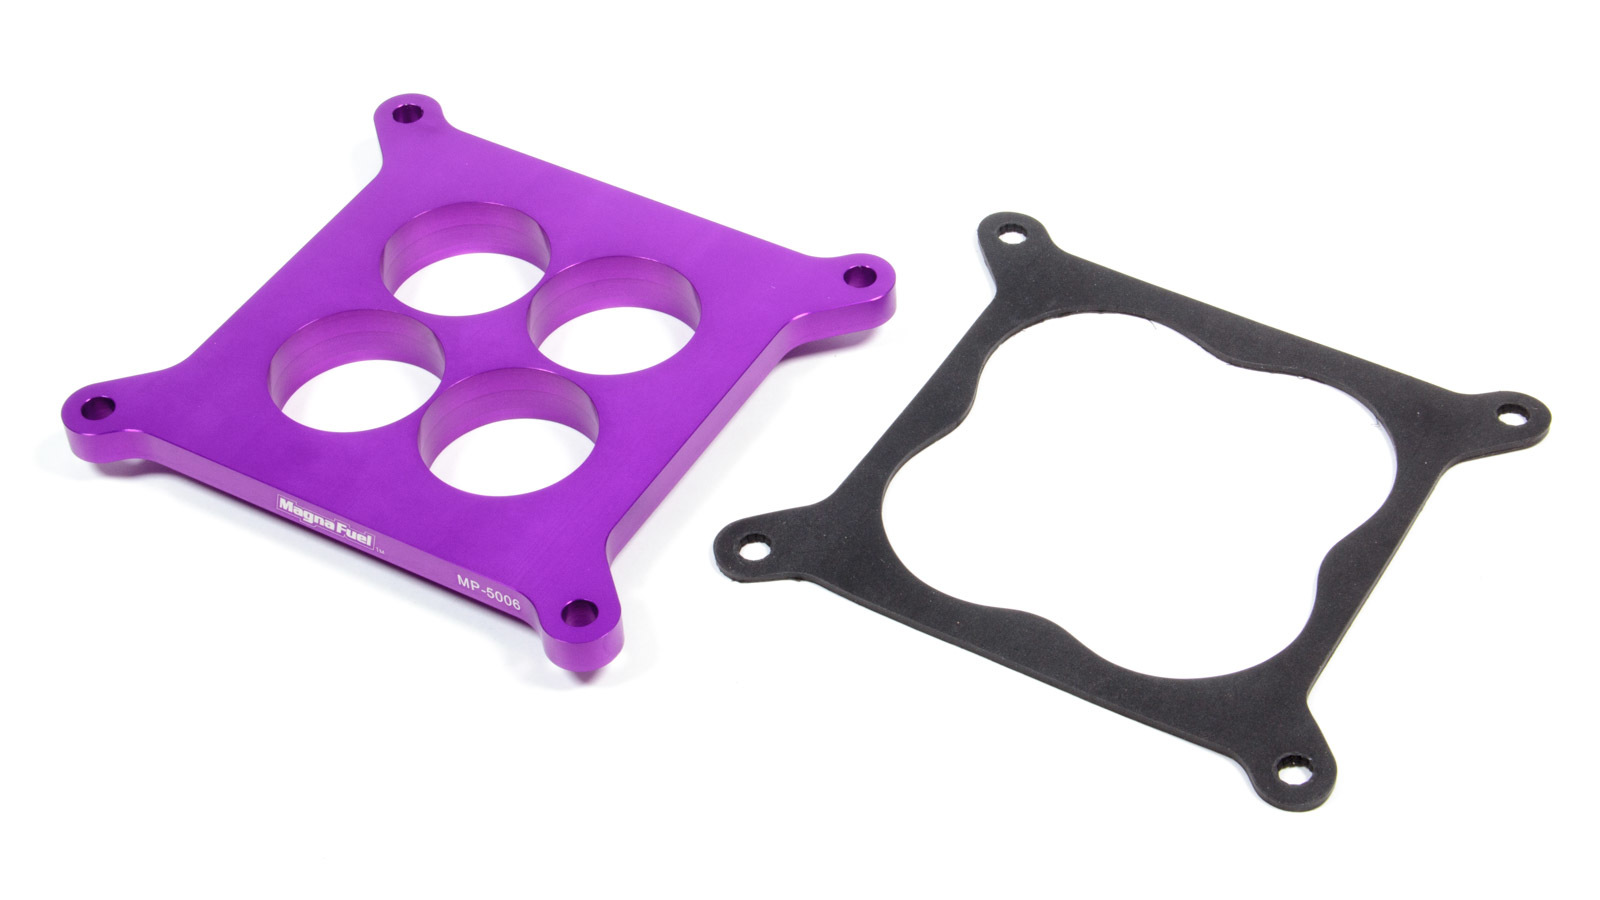 Magnafuel MP-5006 Anti-Reversion Plate, 1/2 in Thick, 1.750 in Bores, Square Bore, Gasket Included, Aluminum, Purple Anodized, Each